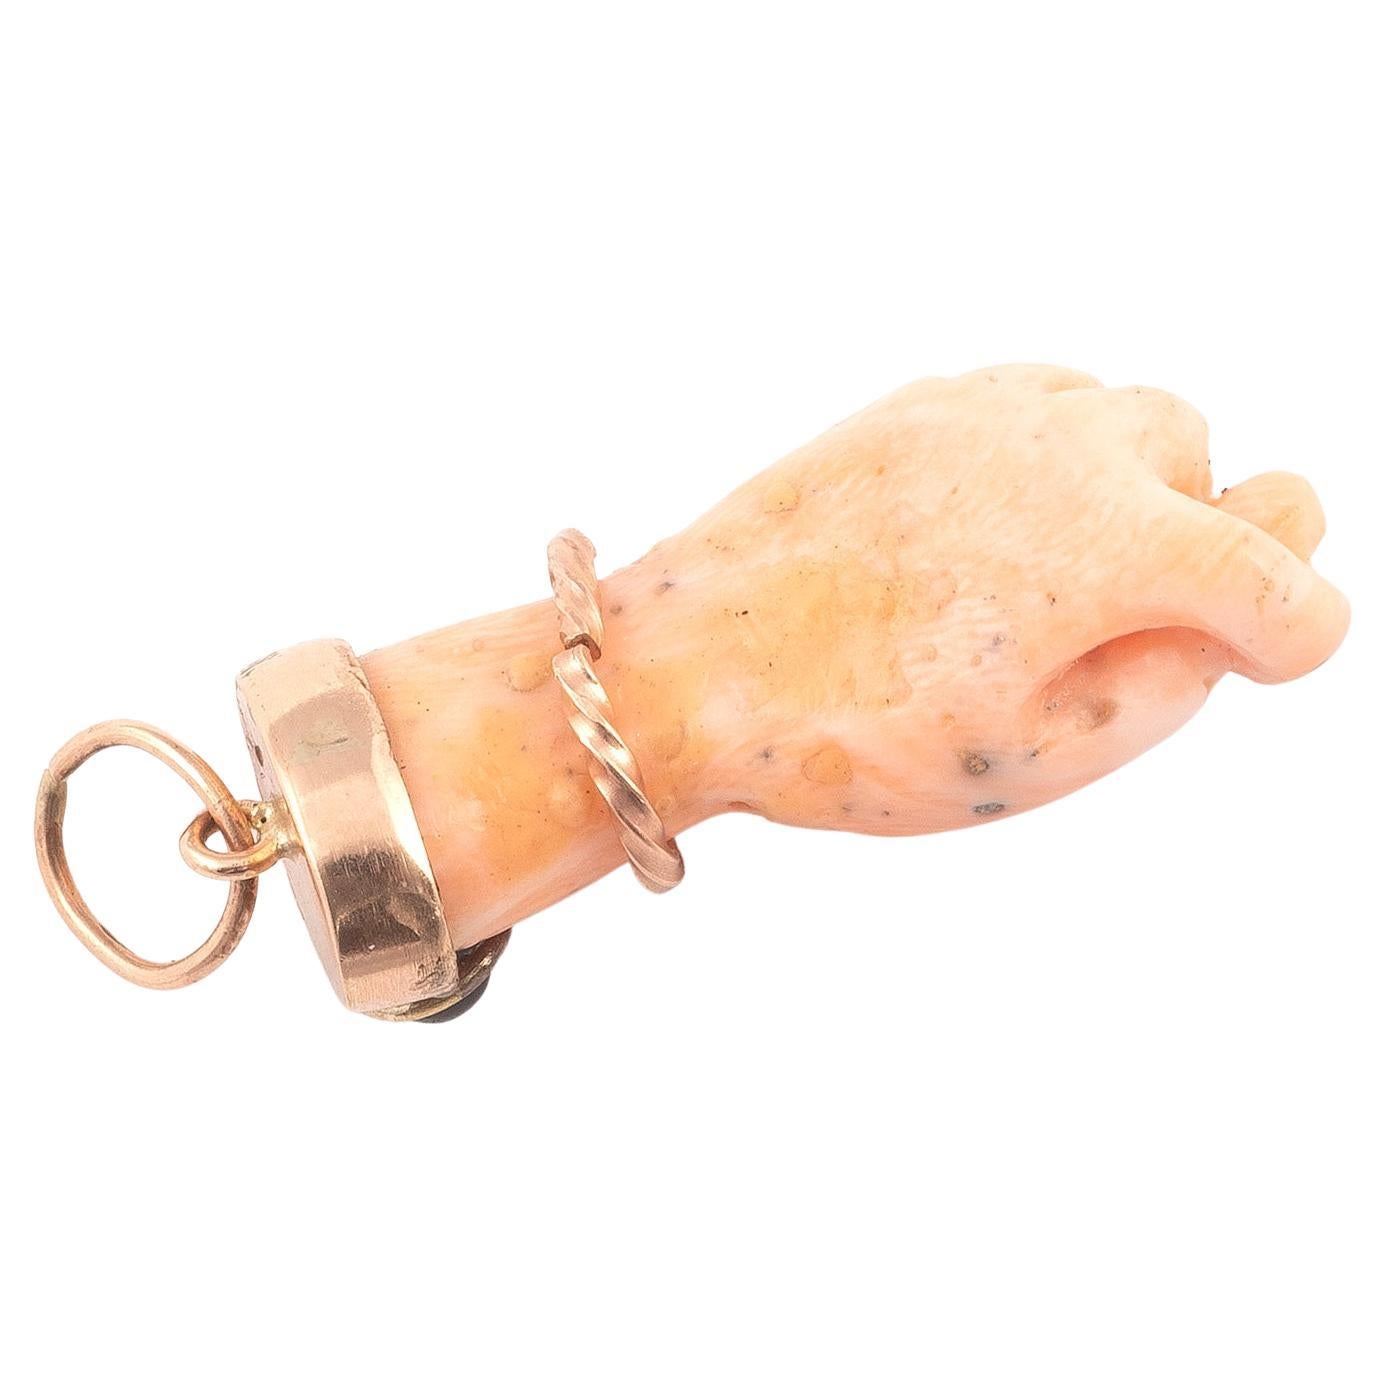 A beautiful figa hand charm made of *coral and set with a 14 karat gold bail. The hand is nicely detailed. The charm is great worn alone or layered with your other favorites. The charm comes without the necklace. 
The figa hand symbol dates back